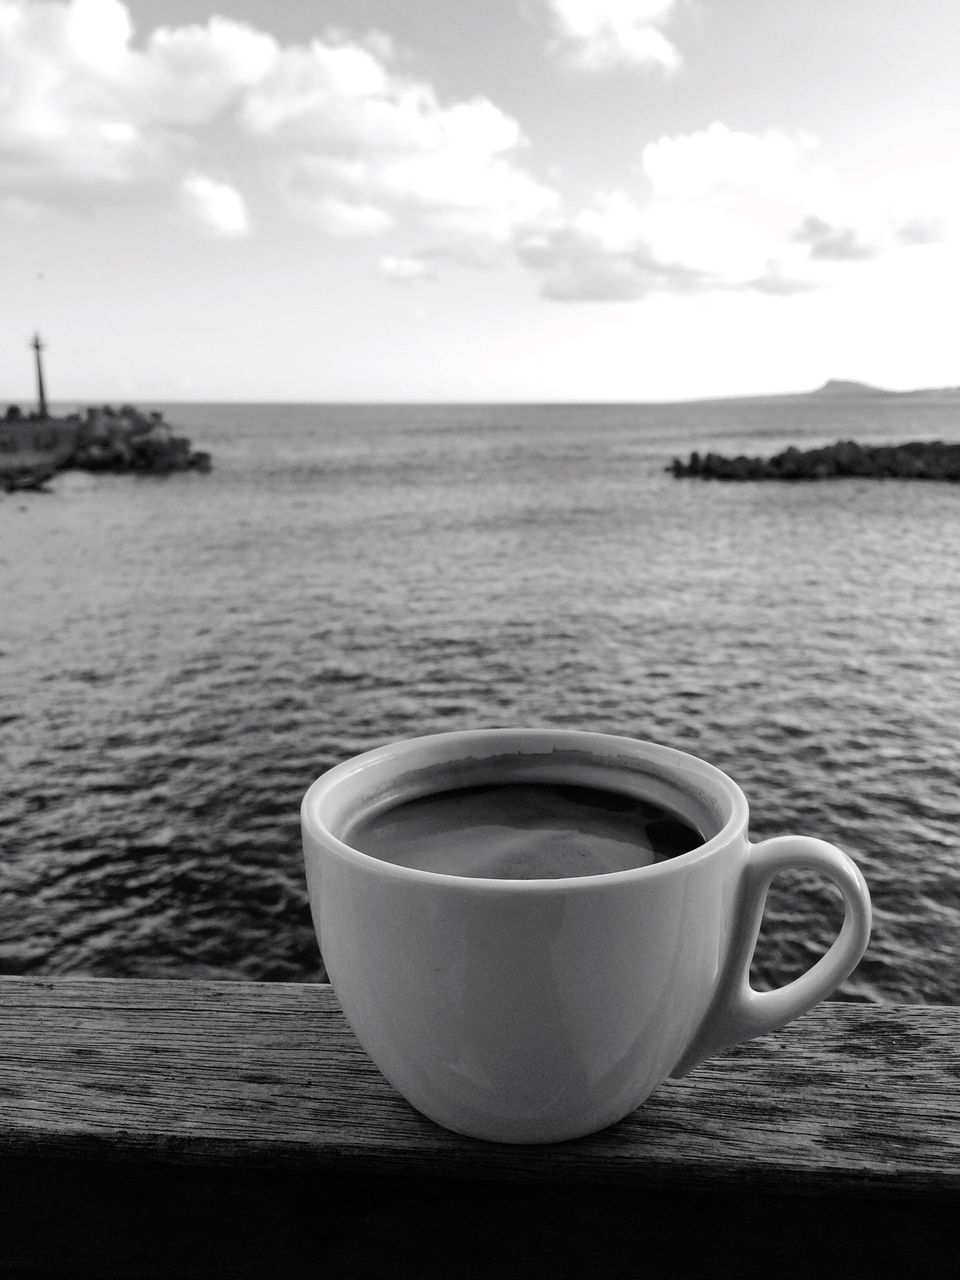 drink, coffee cup, food and drink, water, refreshment, no people, sea, horizon over water, coffee - drink, table, sky, tranquility, nature, close-up, day, freshness, scenics, beauty in nature, outdoors